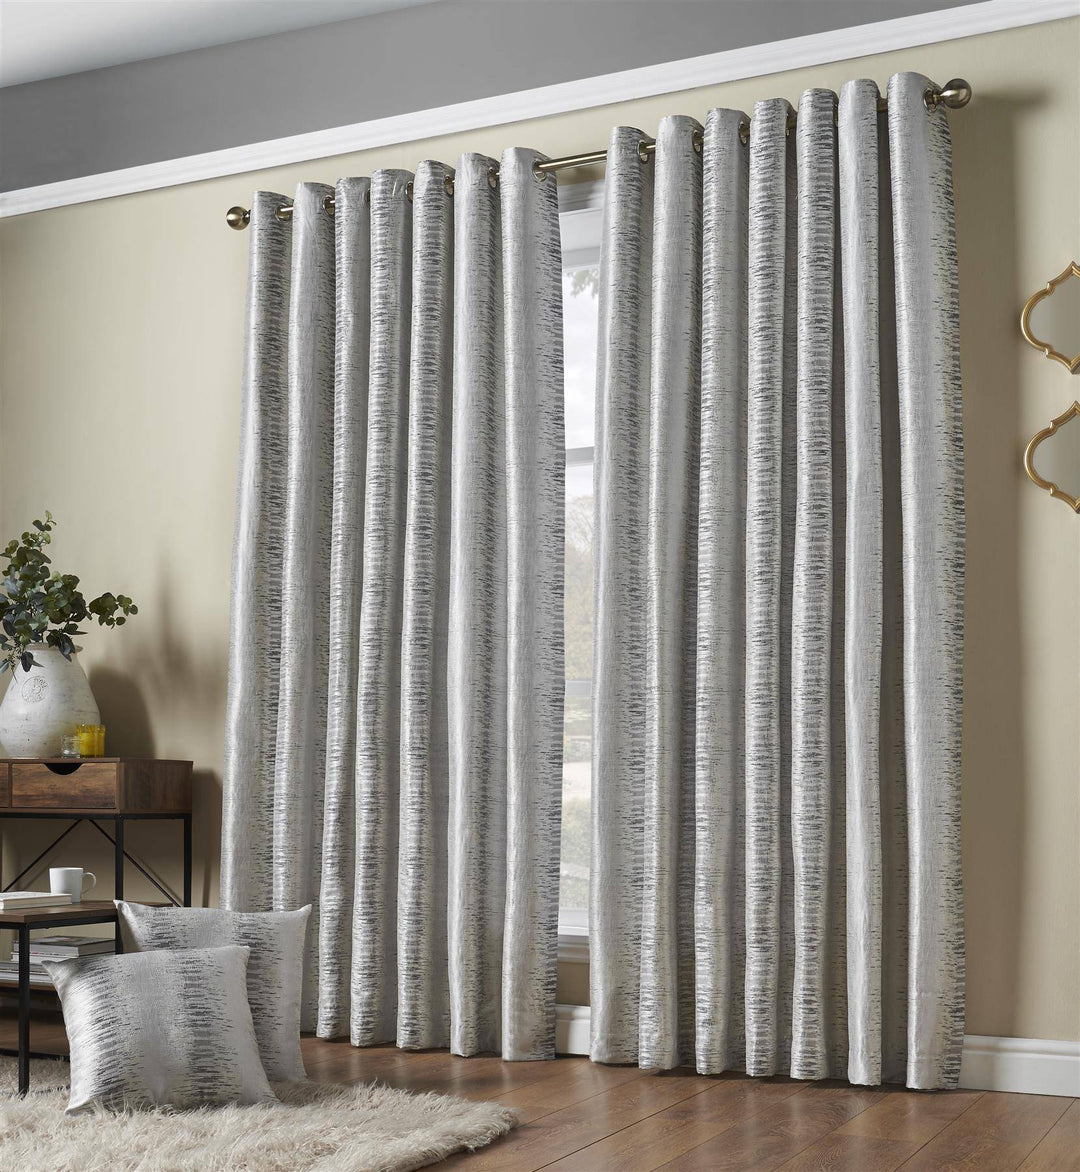 Reflections (Ring Top Curtains) - TidySpaces